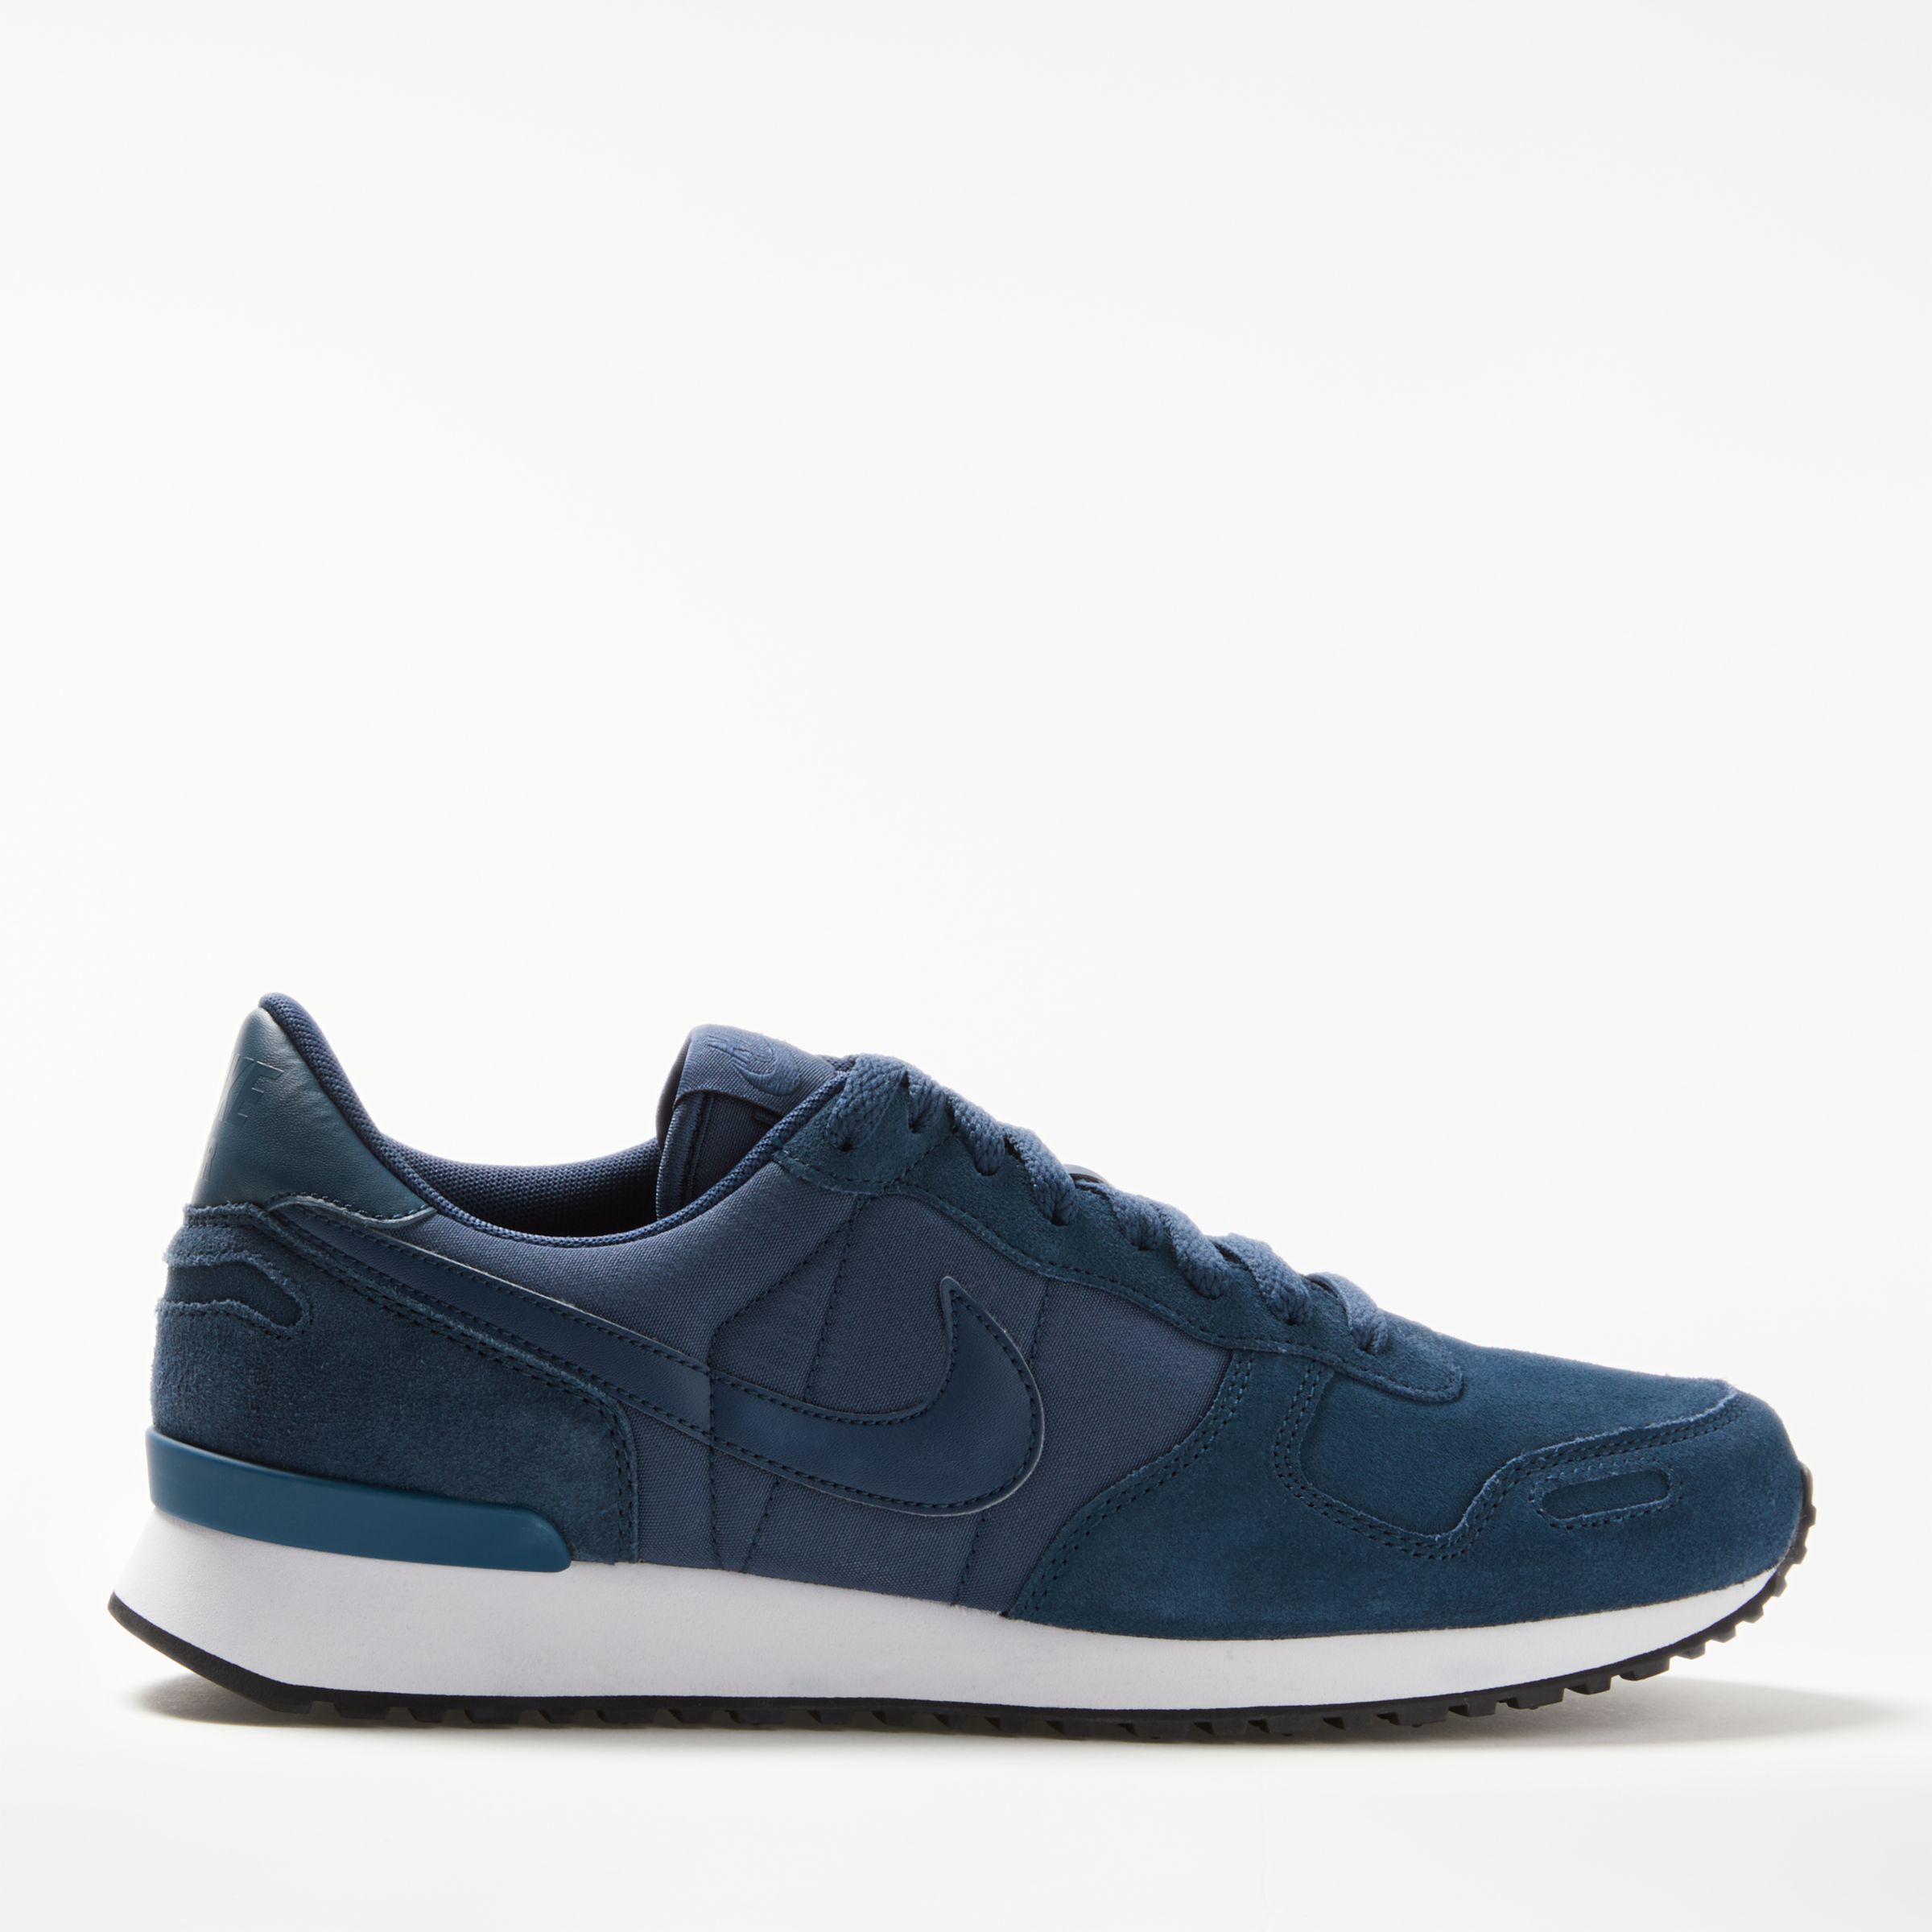 mens nike trainers navy